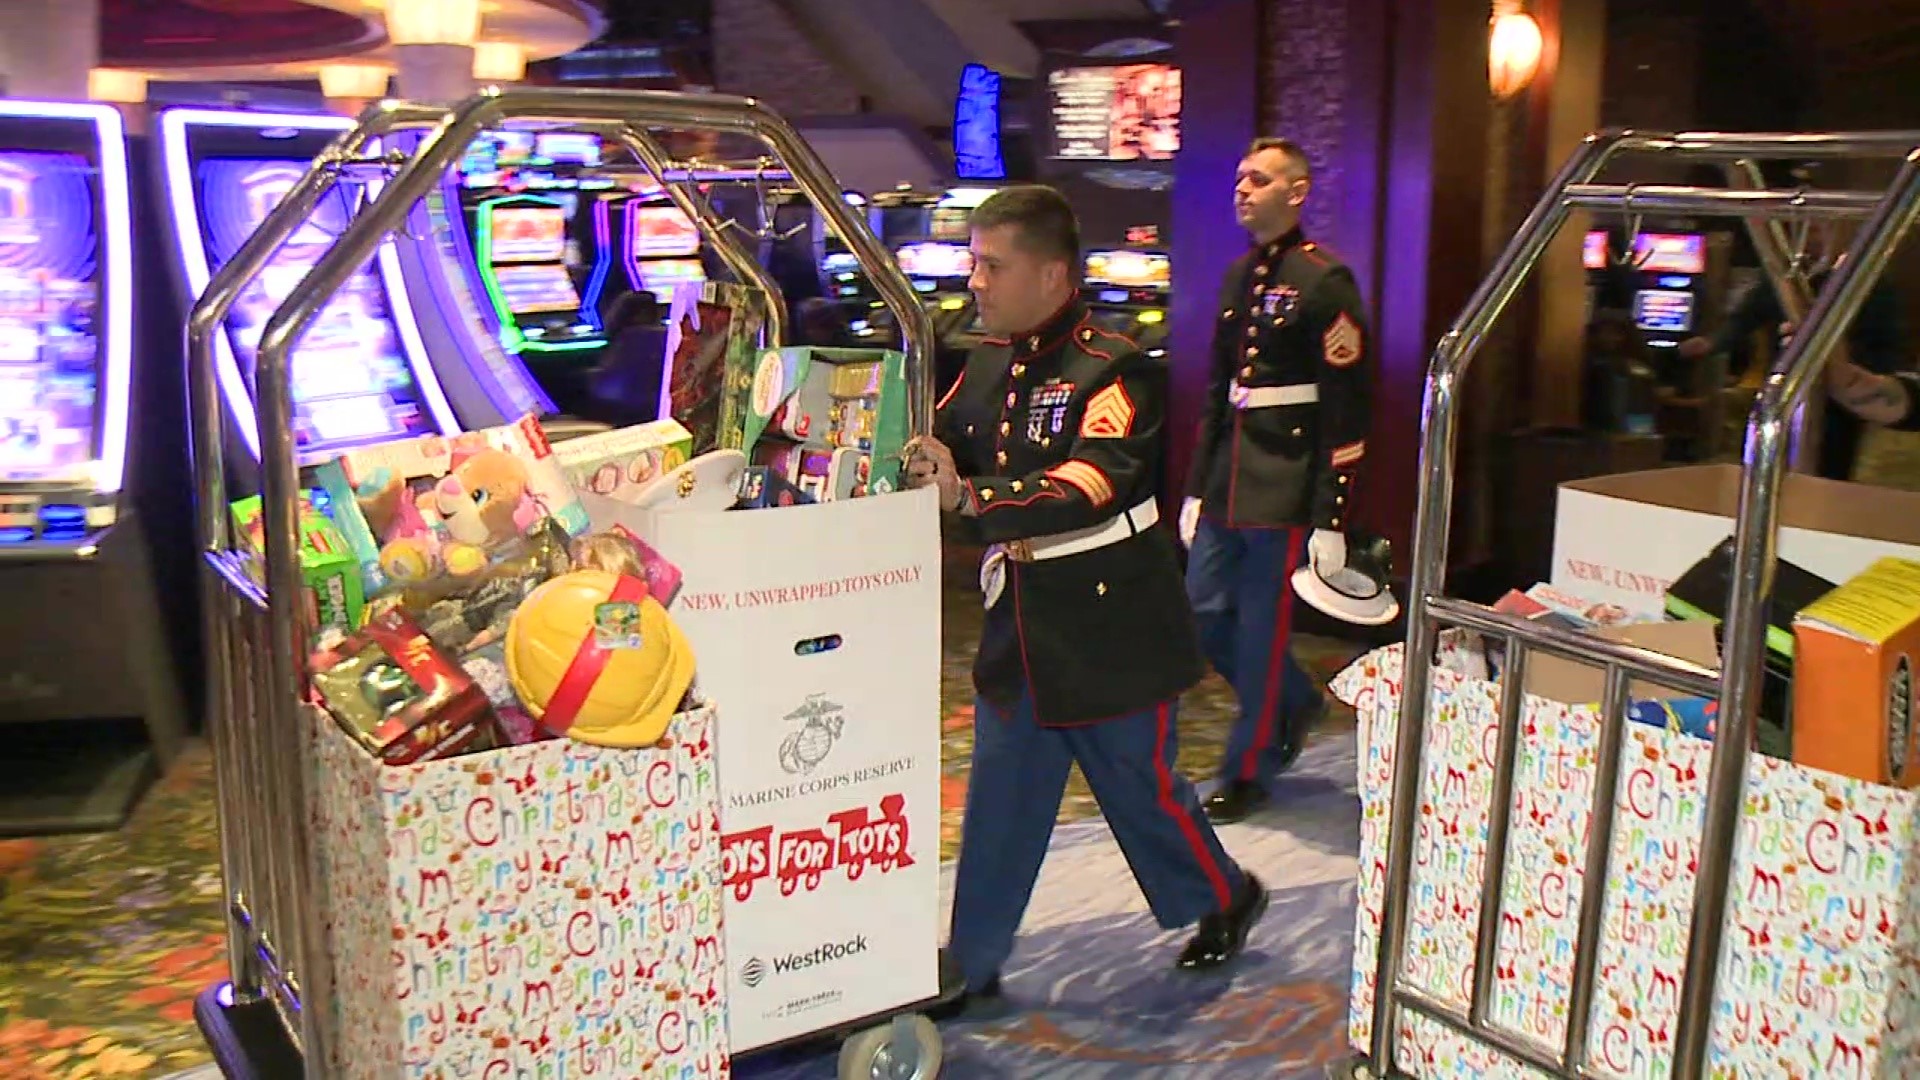 Staff at Mohegan Sun Pocono held a toy drive. They collected nearly 300 gifts for the kids in the Wilkes-Barre area.